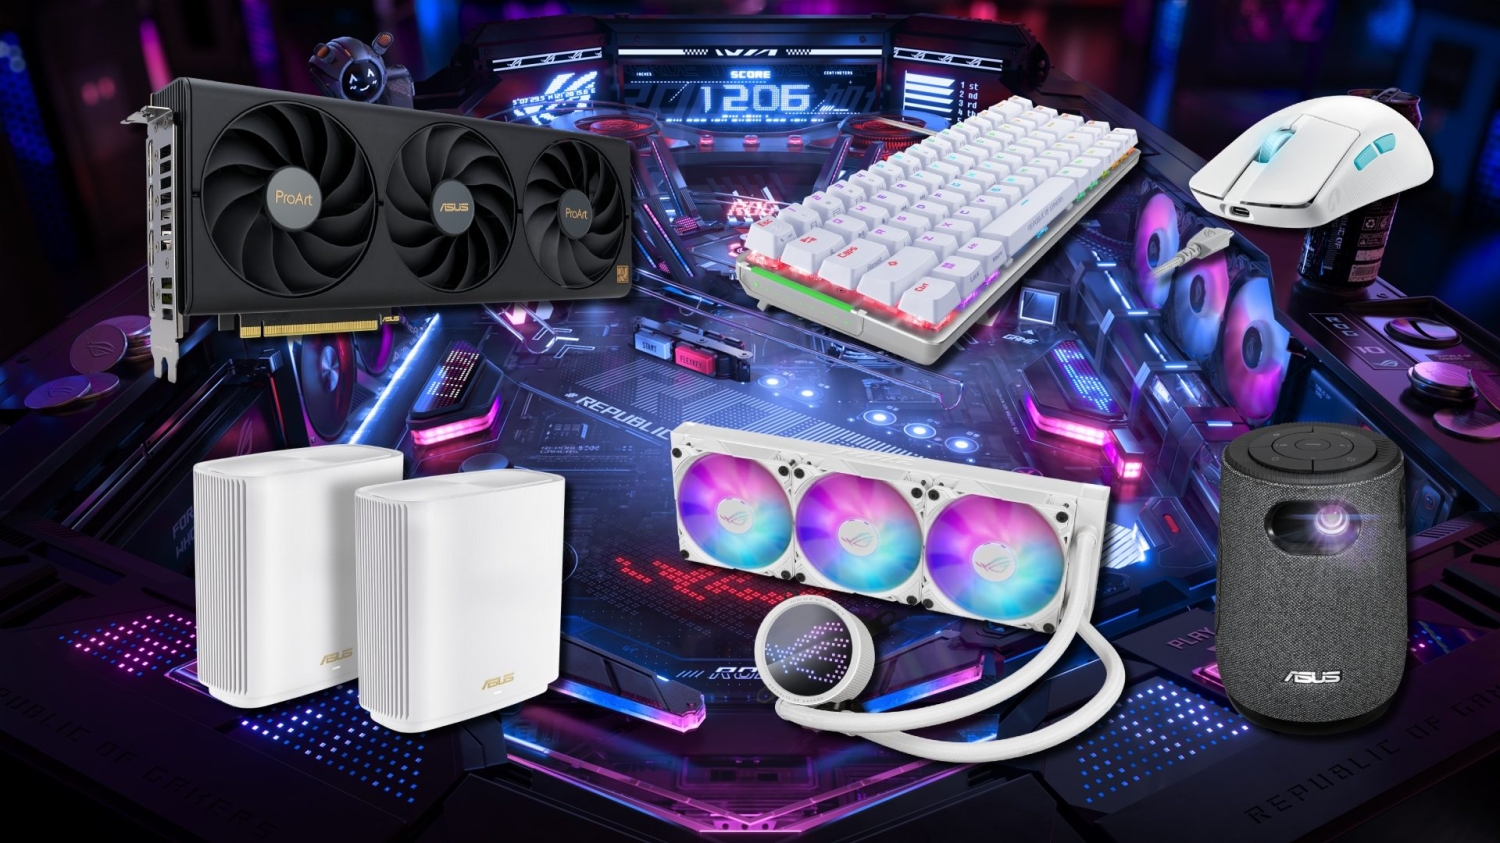 Holiday gift guide 2021: the best tech gifts from ASUS and ROG - Edge Up